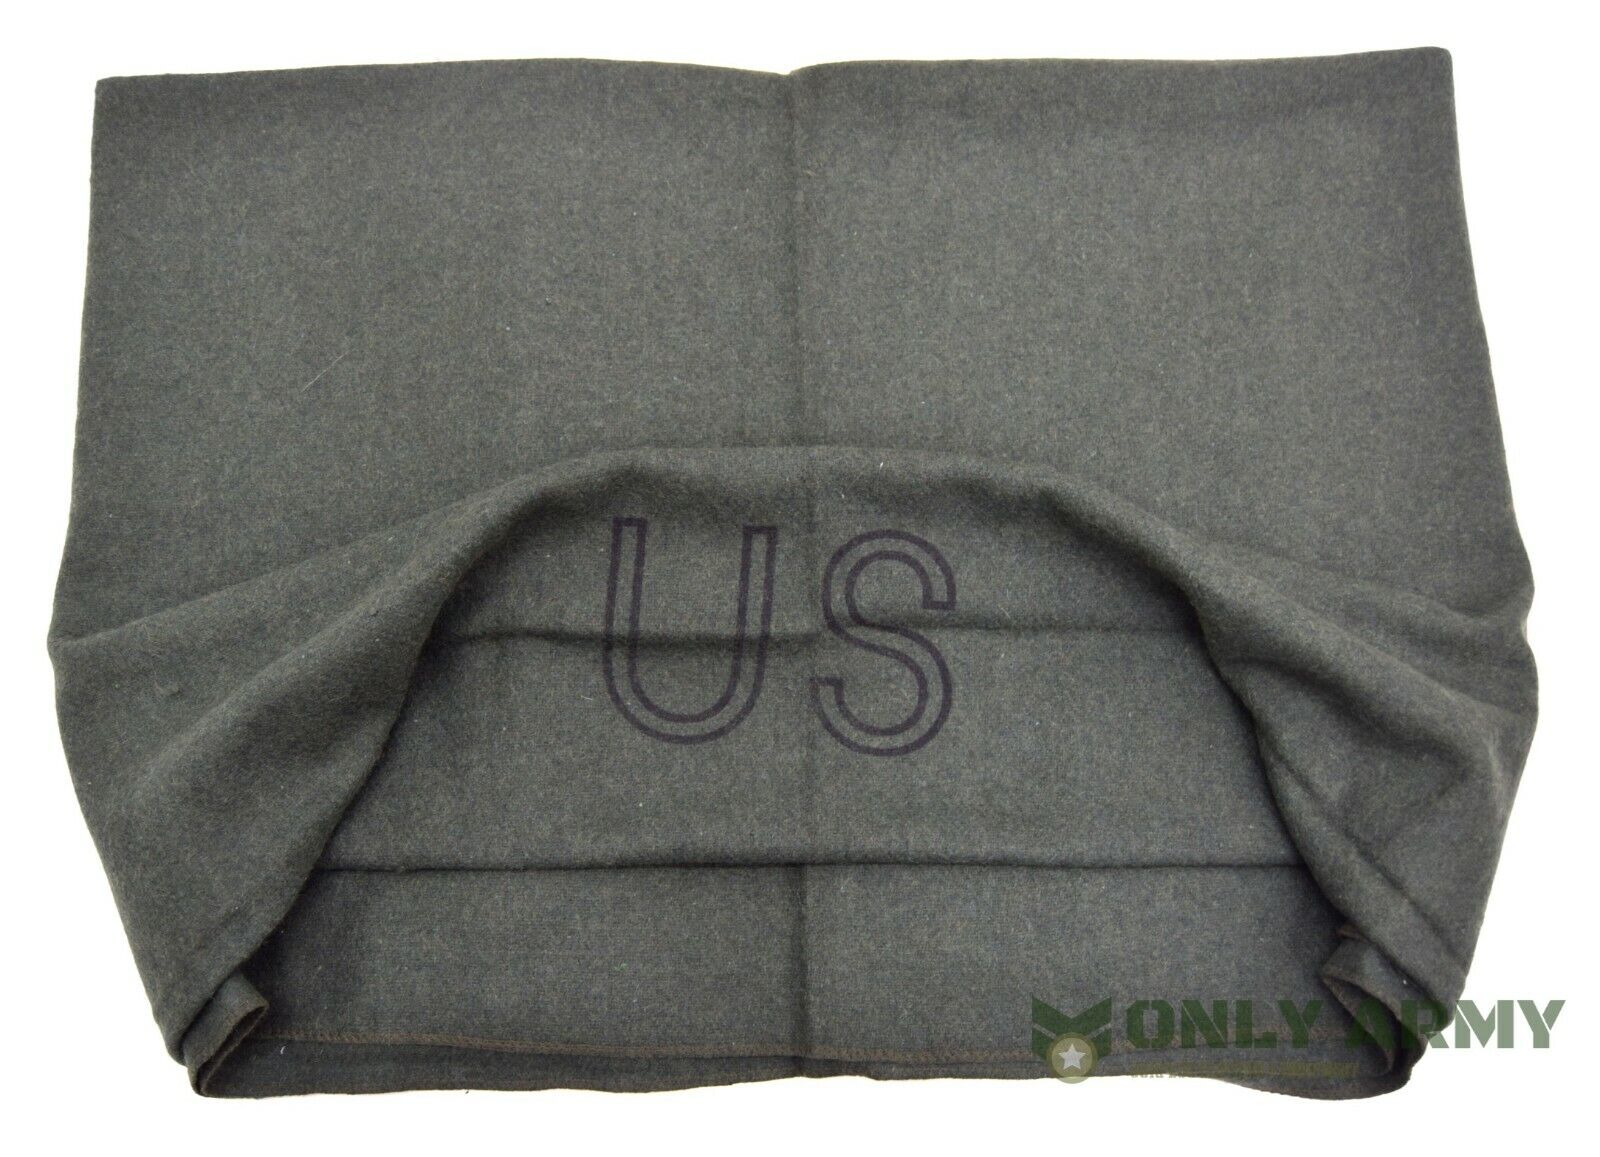 NEW US Army OD Olive Wool Blanket High Quality Military 75% Wool Blanket Camping